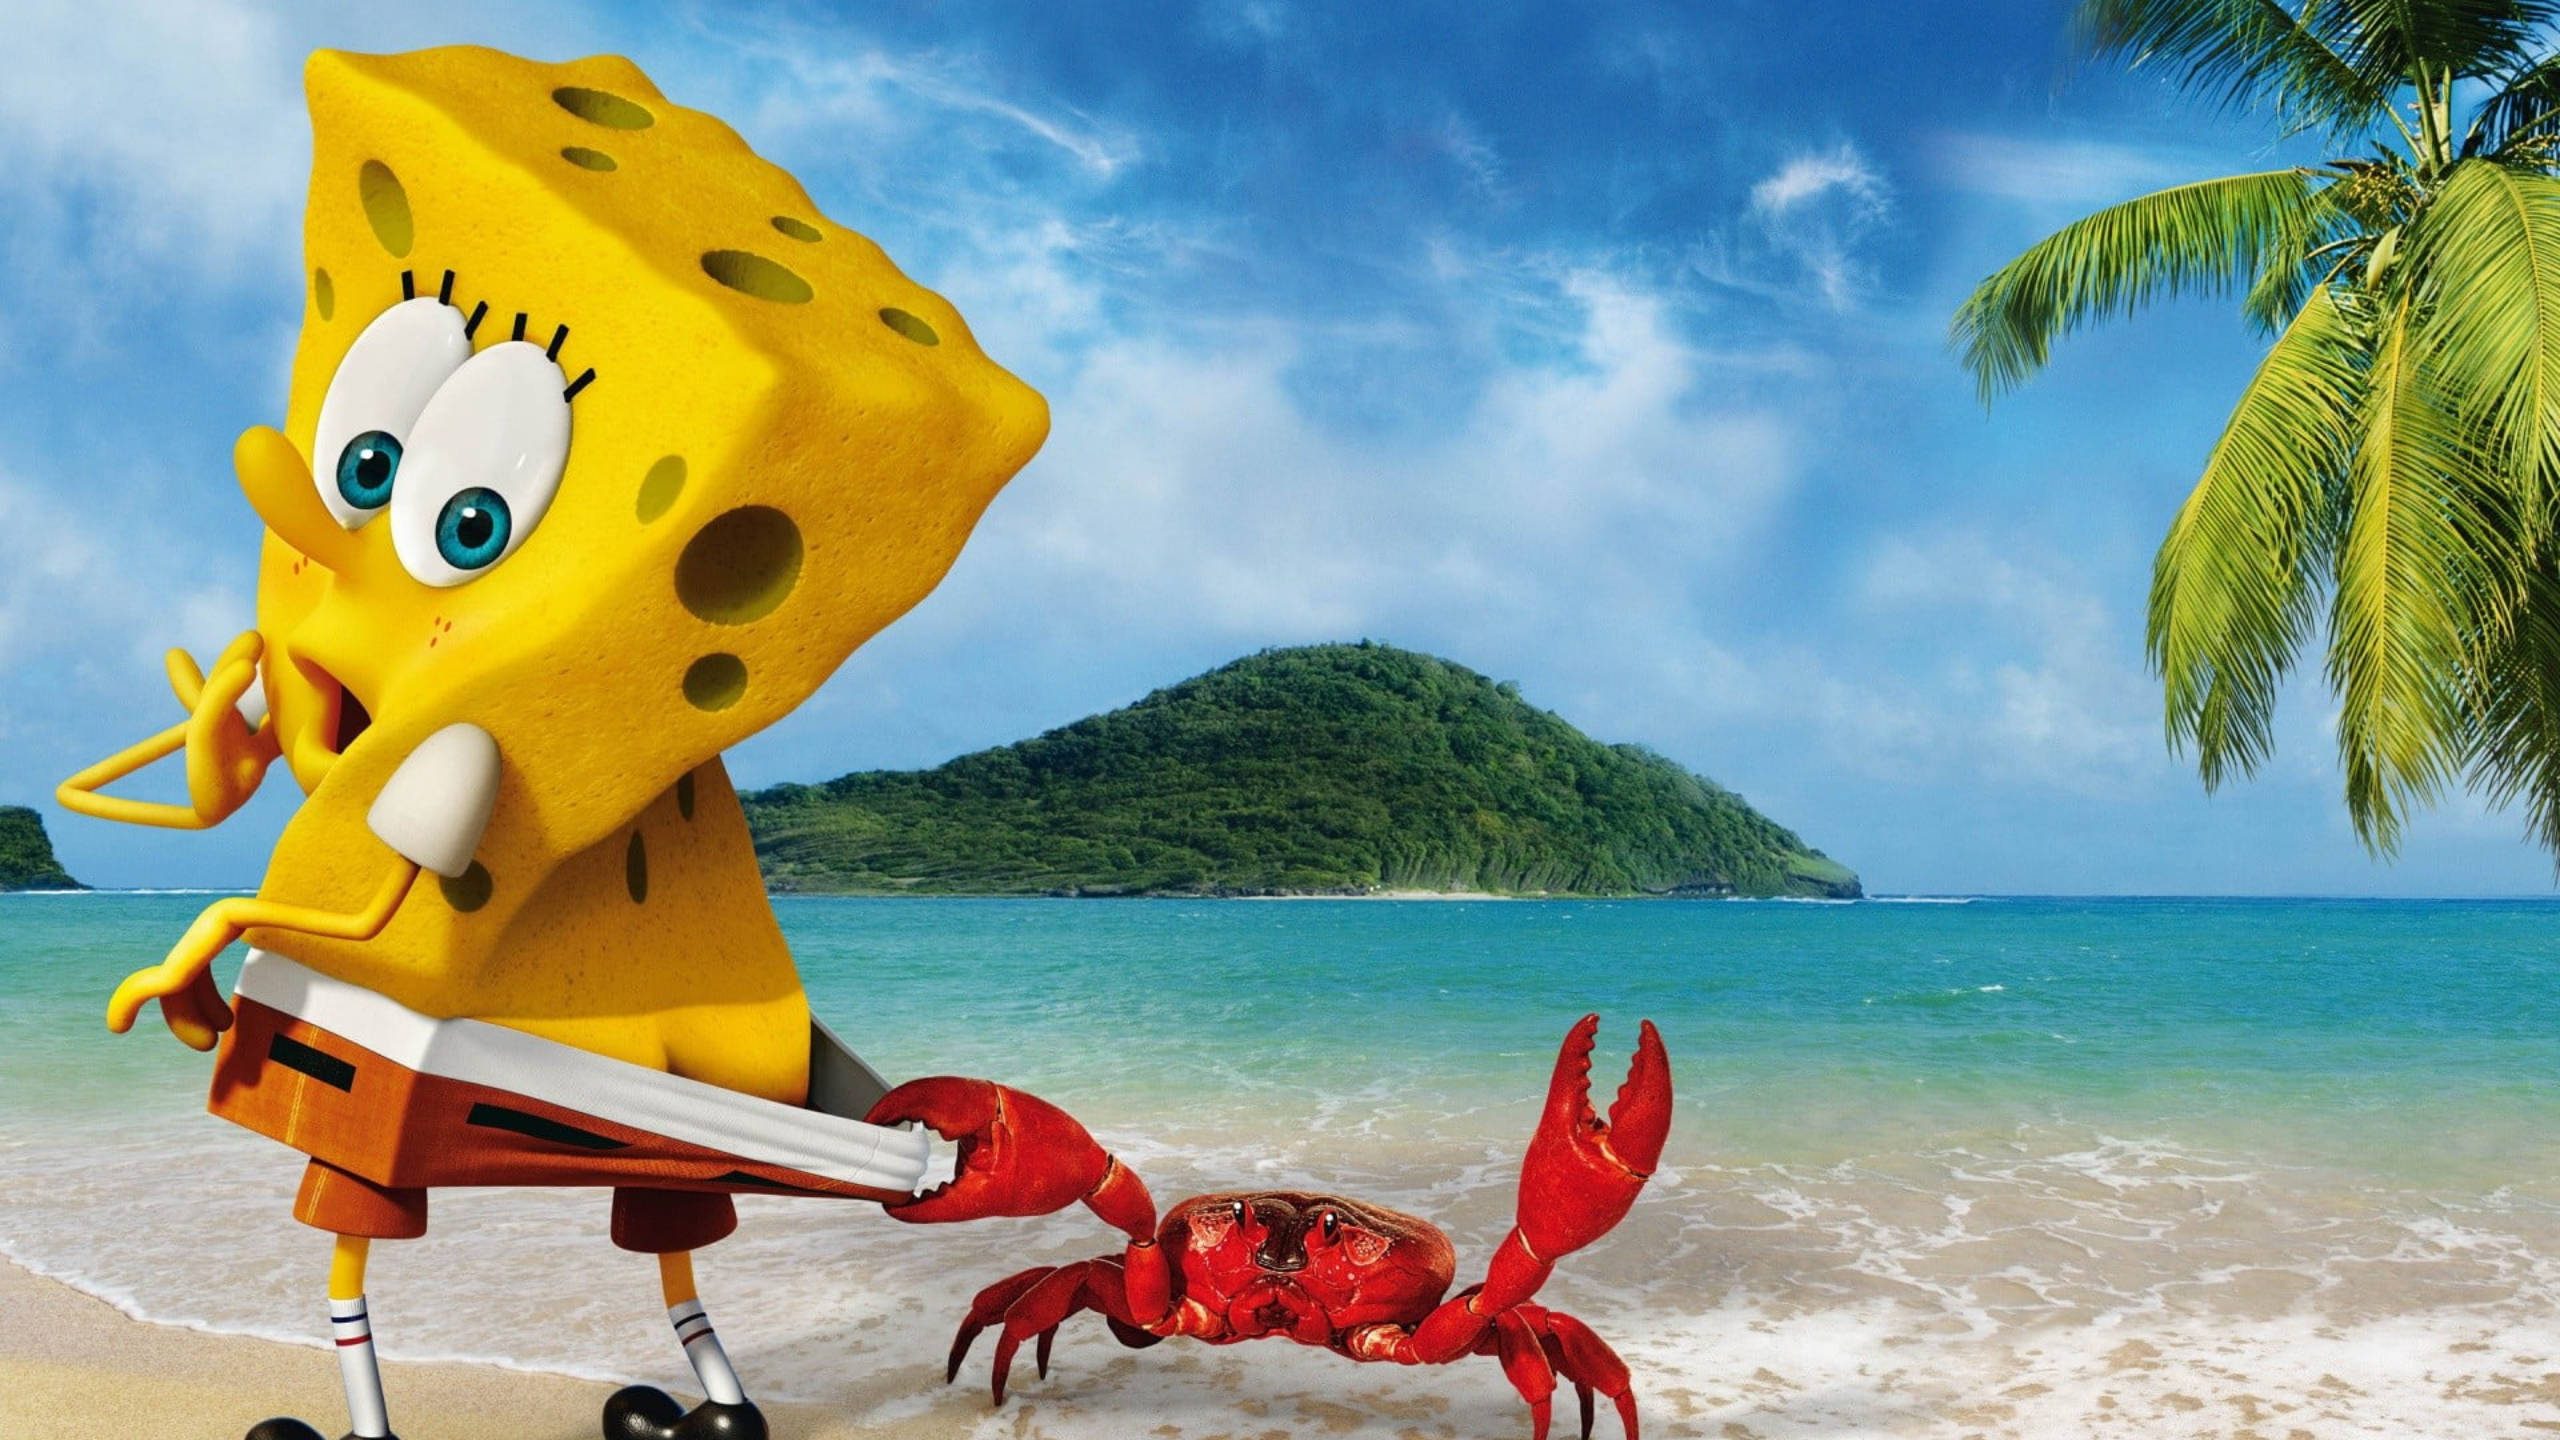 Spongebob And Crab In 3d Background